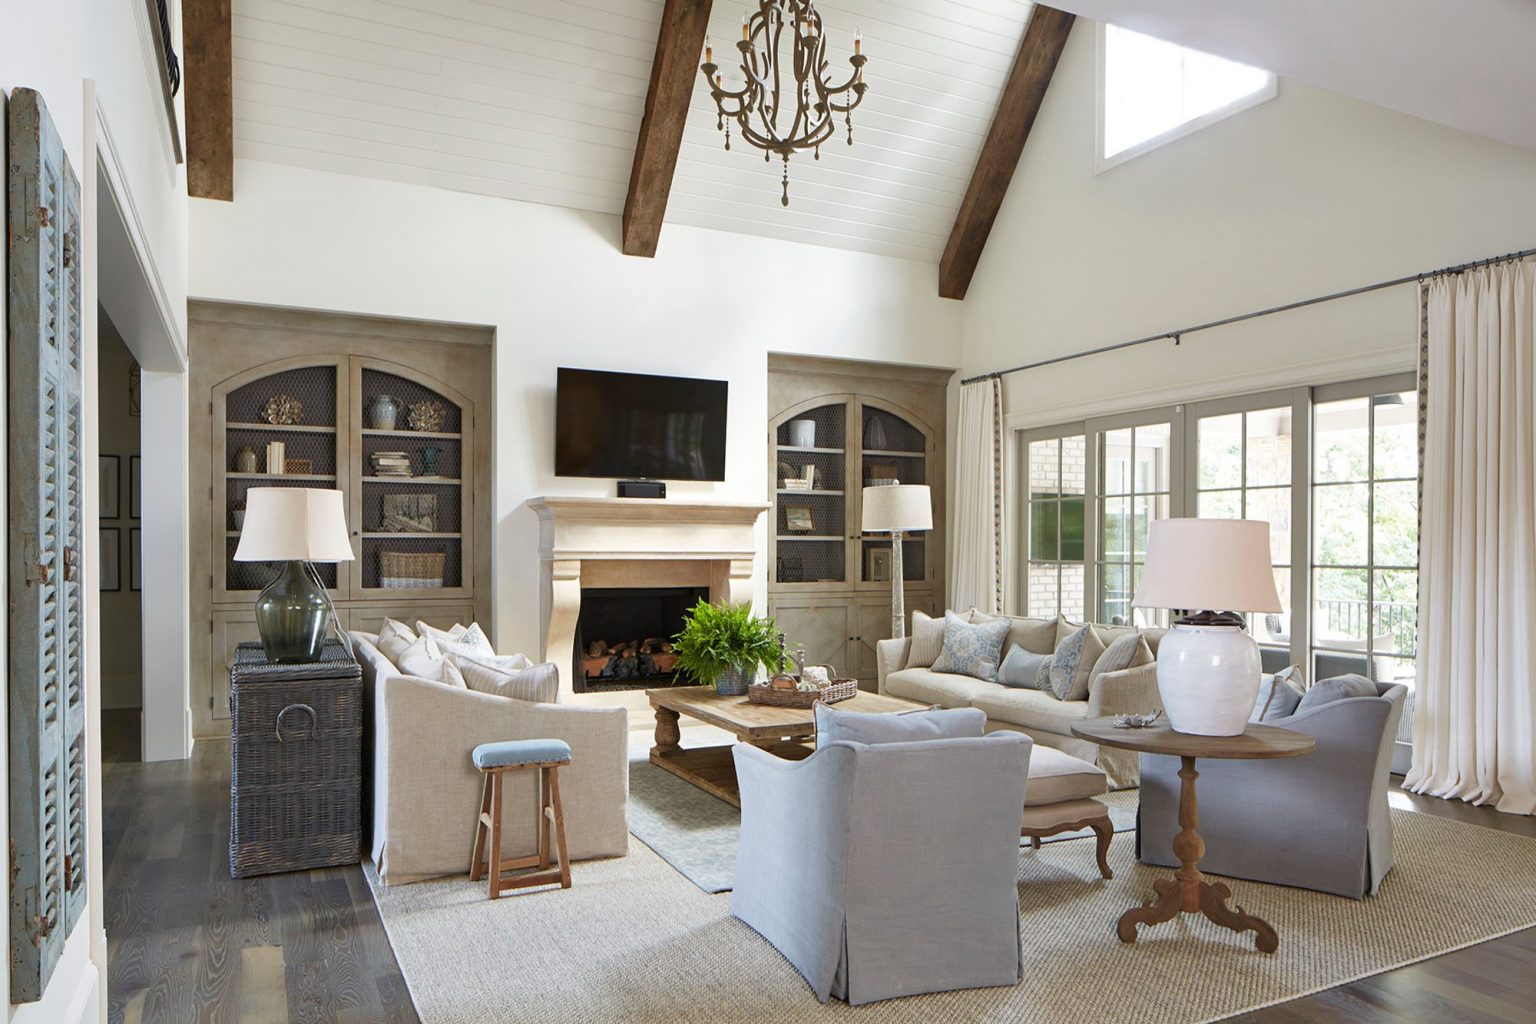 Vaulted Ceilings Pros and Cons | Are They Worth It?